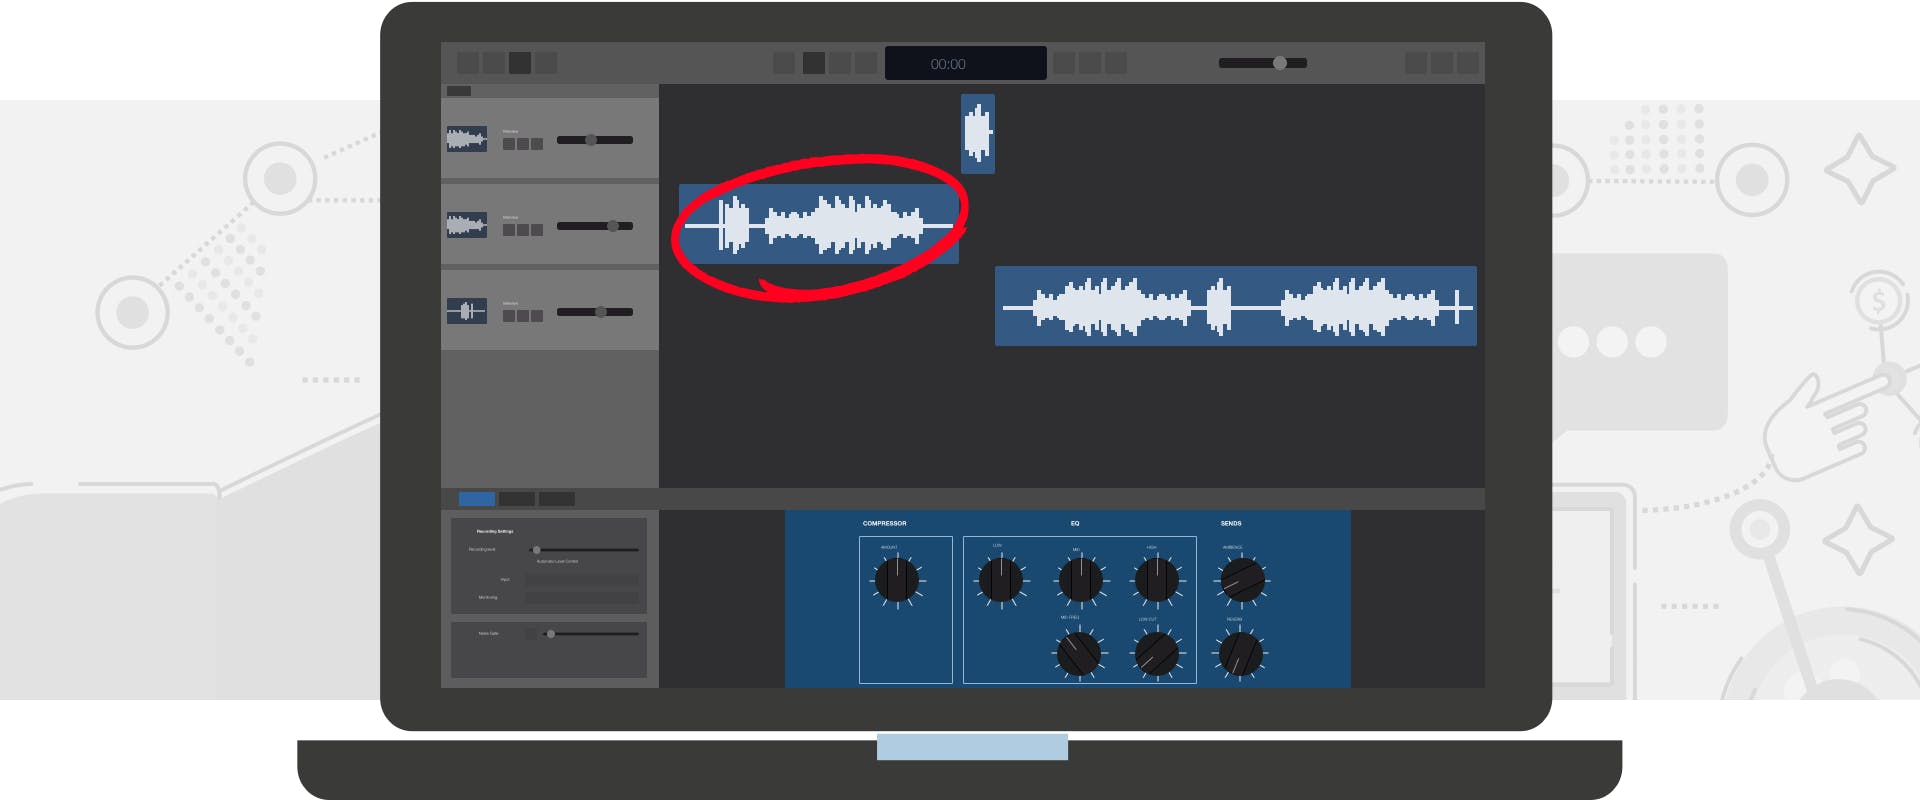 Laptop with audio production software opened and the intro circled in red